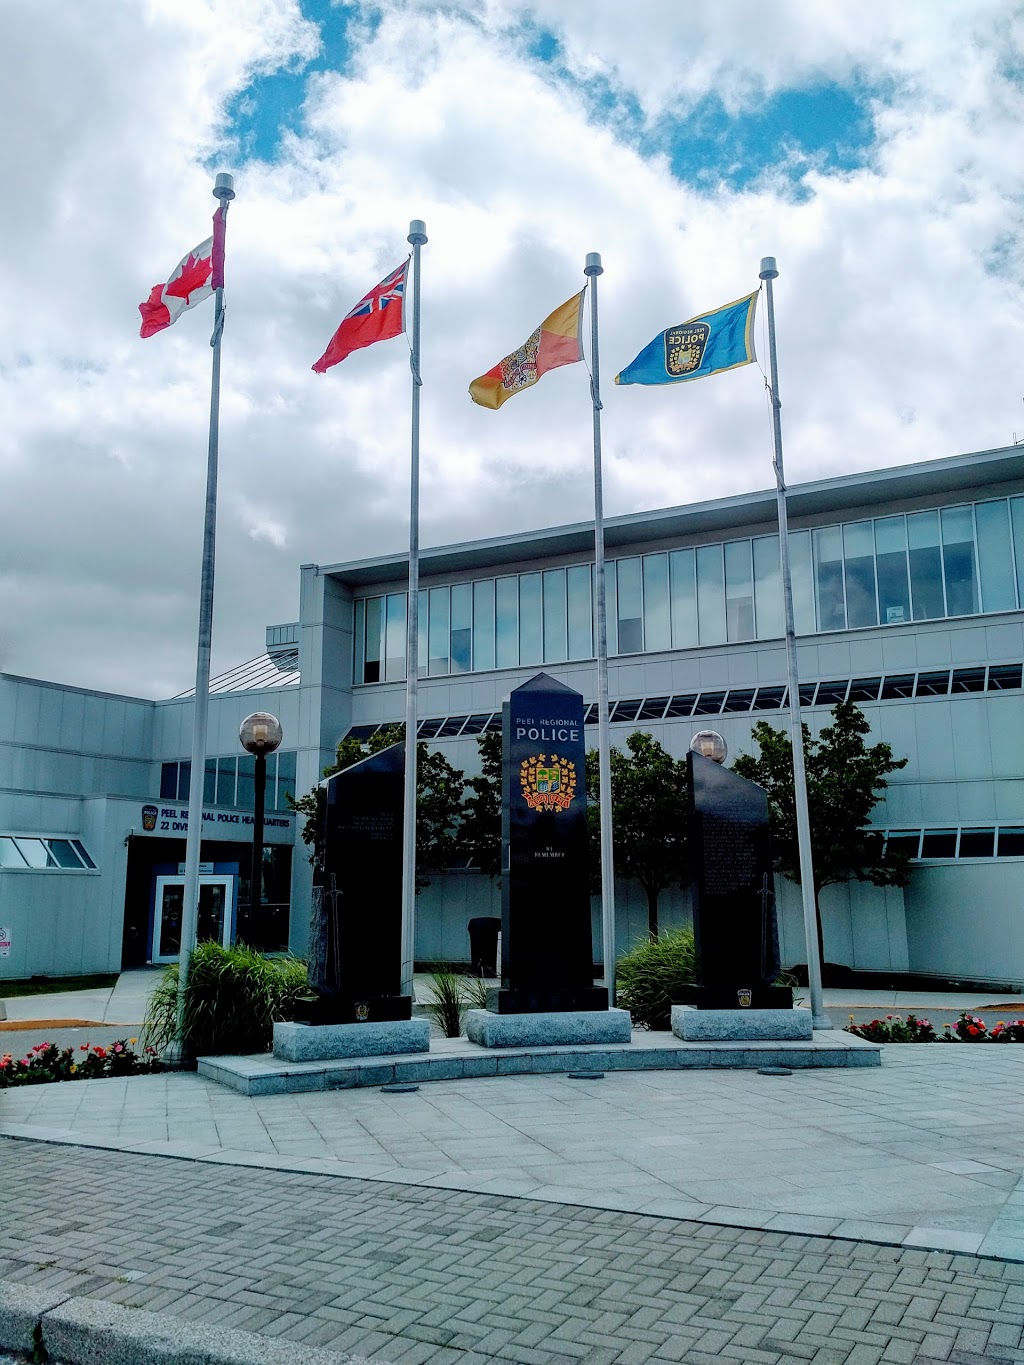 Peel Regional Police Headquarters | police | 7150 Mississauga Rd, Mississauga, ON L5N 8M5, Canada | 90545333114050 OR +1 905-453-3311 ext. 4050